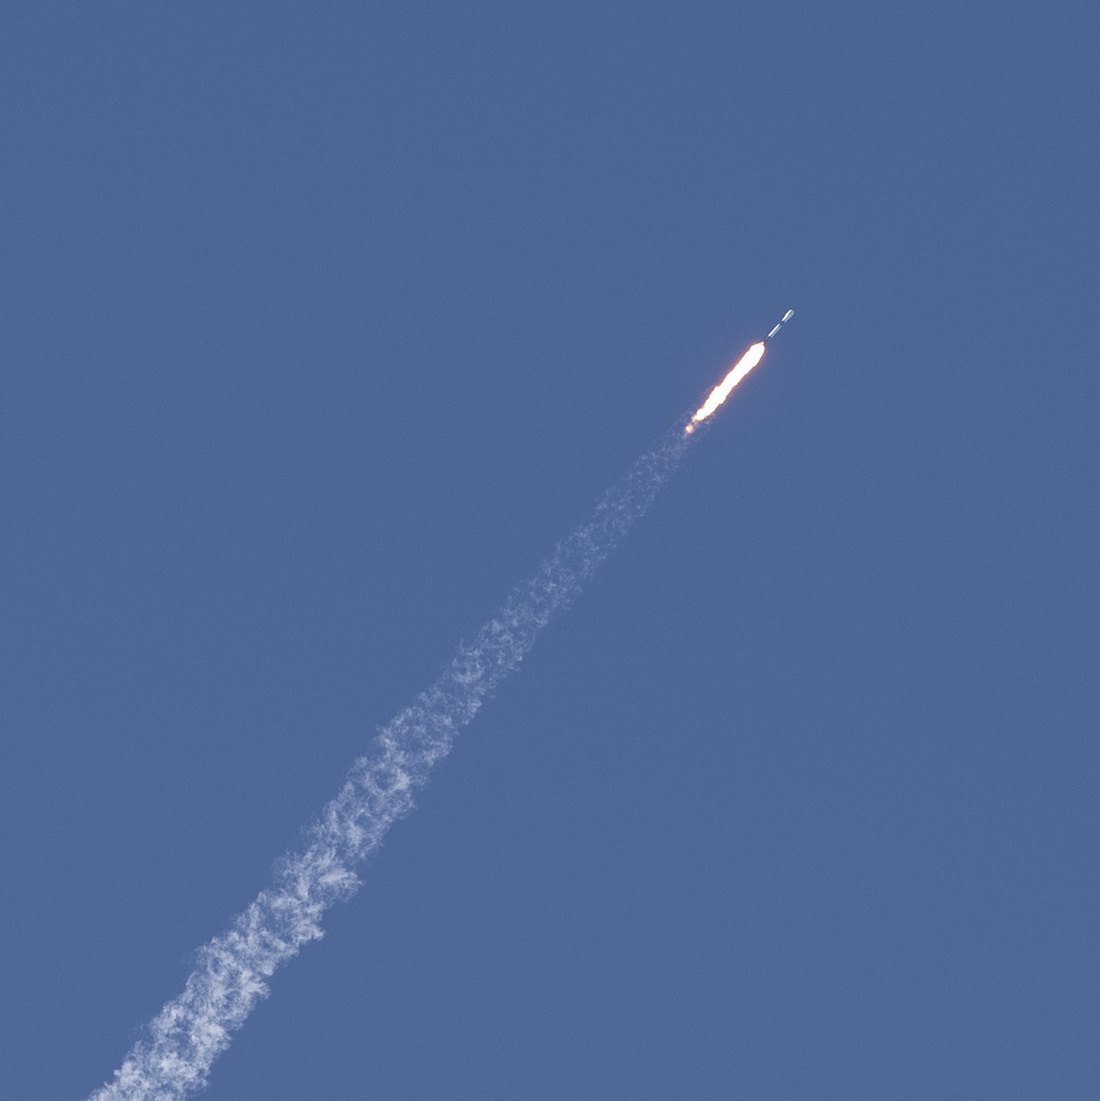 Image of the SpaceX Falcon 9 rocket carrying the KPLO spacecraft and ShadowCam out of Earth atmosphere.